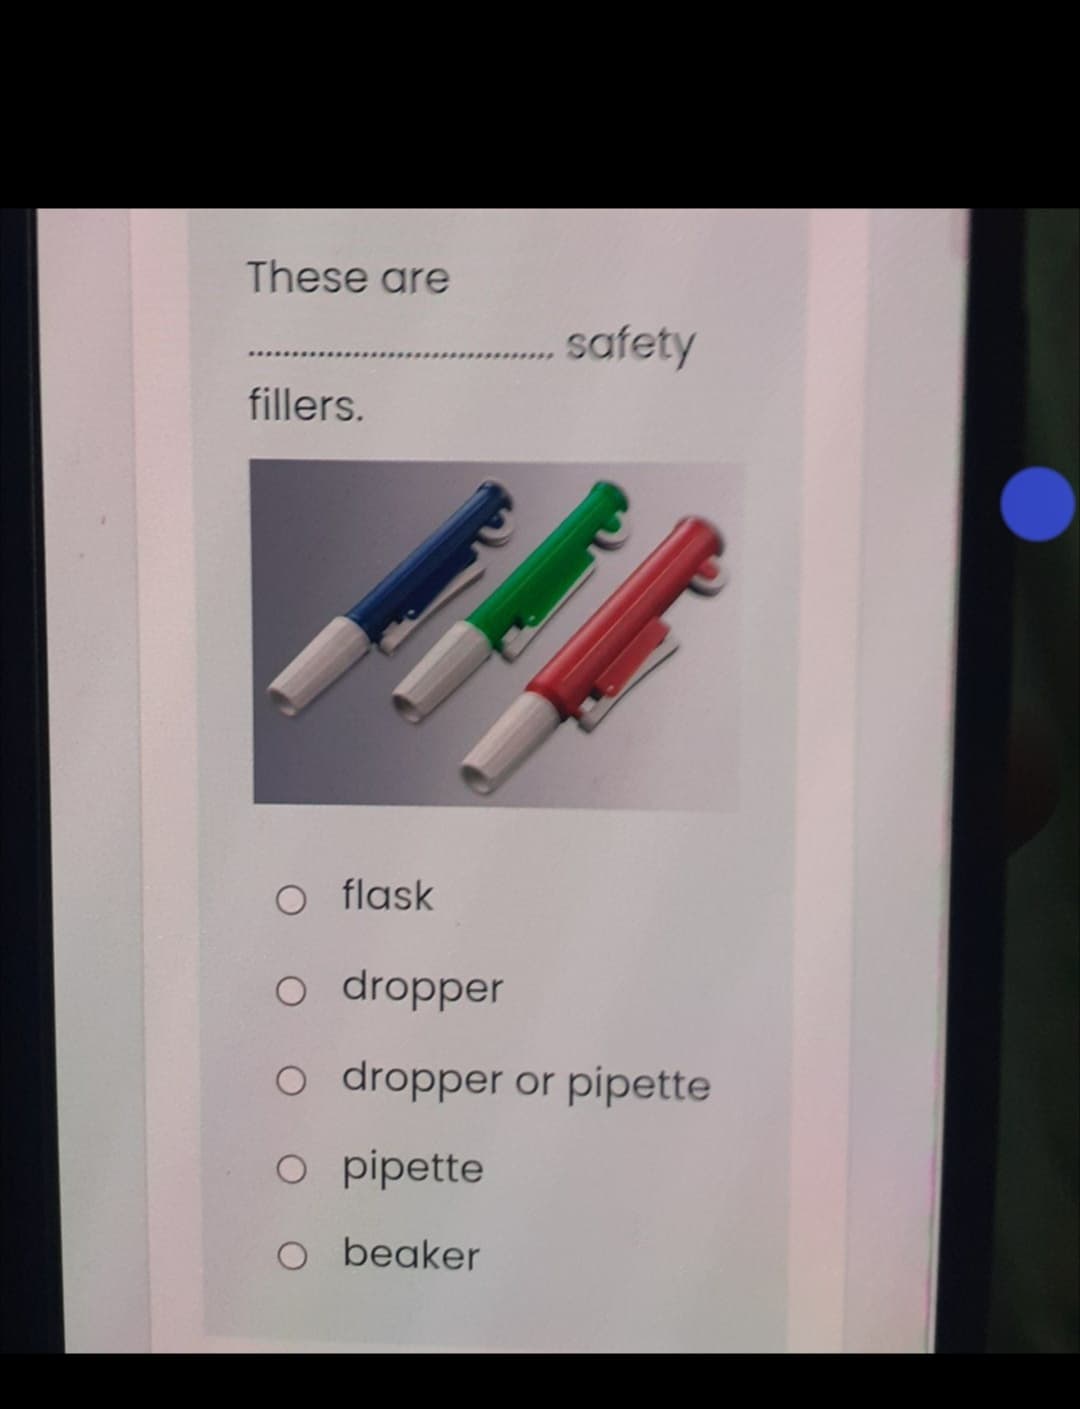 These are
safety
fillers.
O flask
o dropper
o dropper or pipette
o pipette
O beaker
